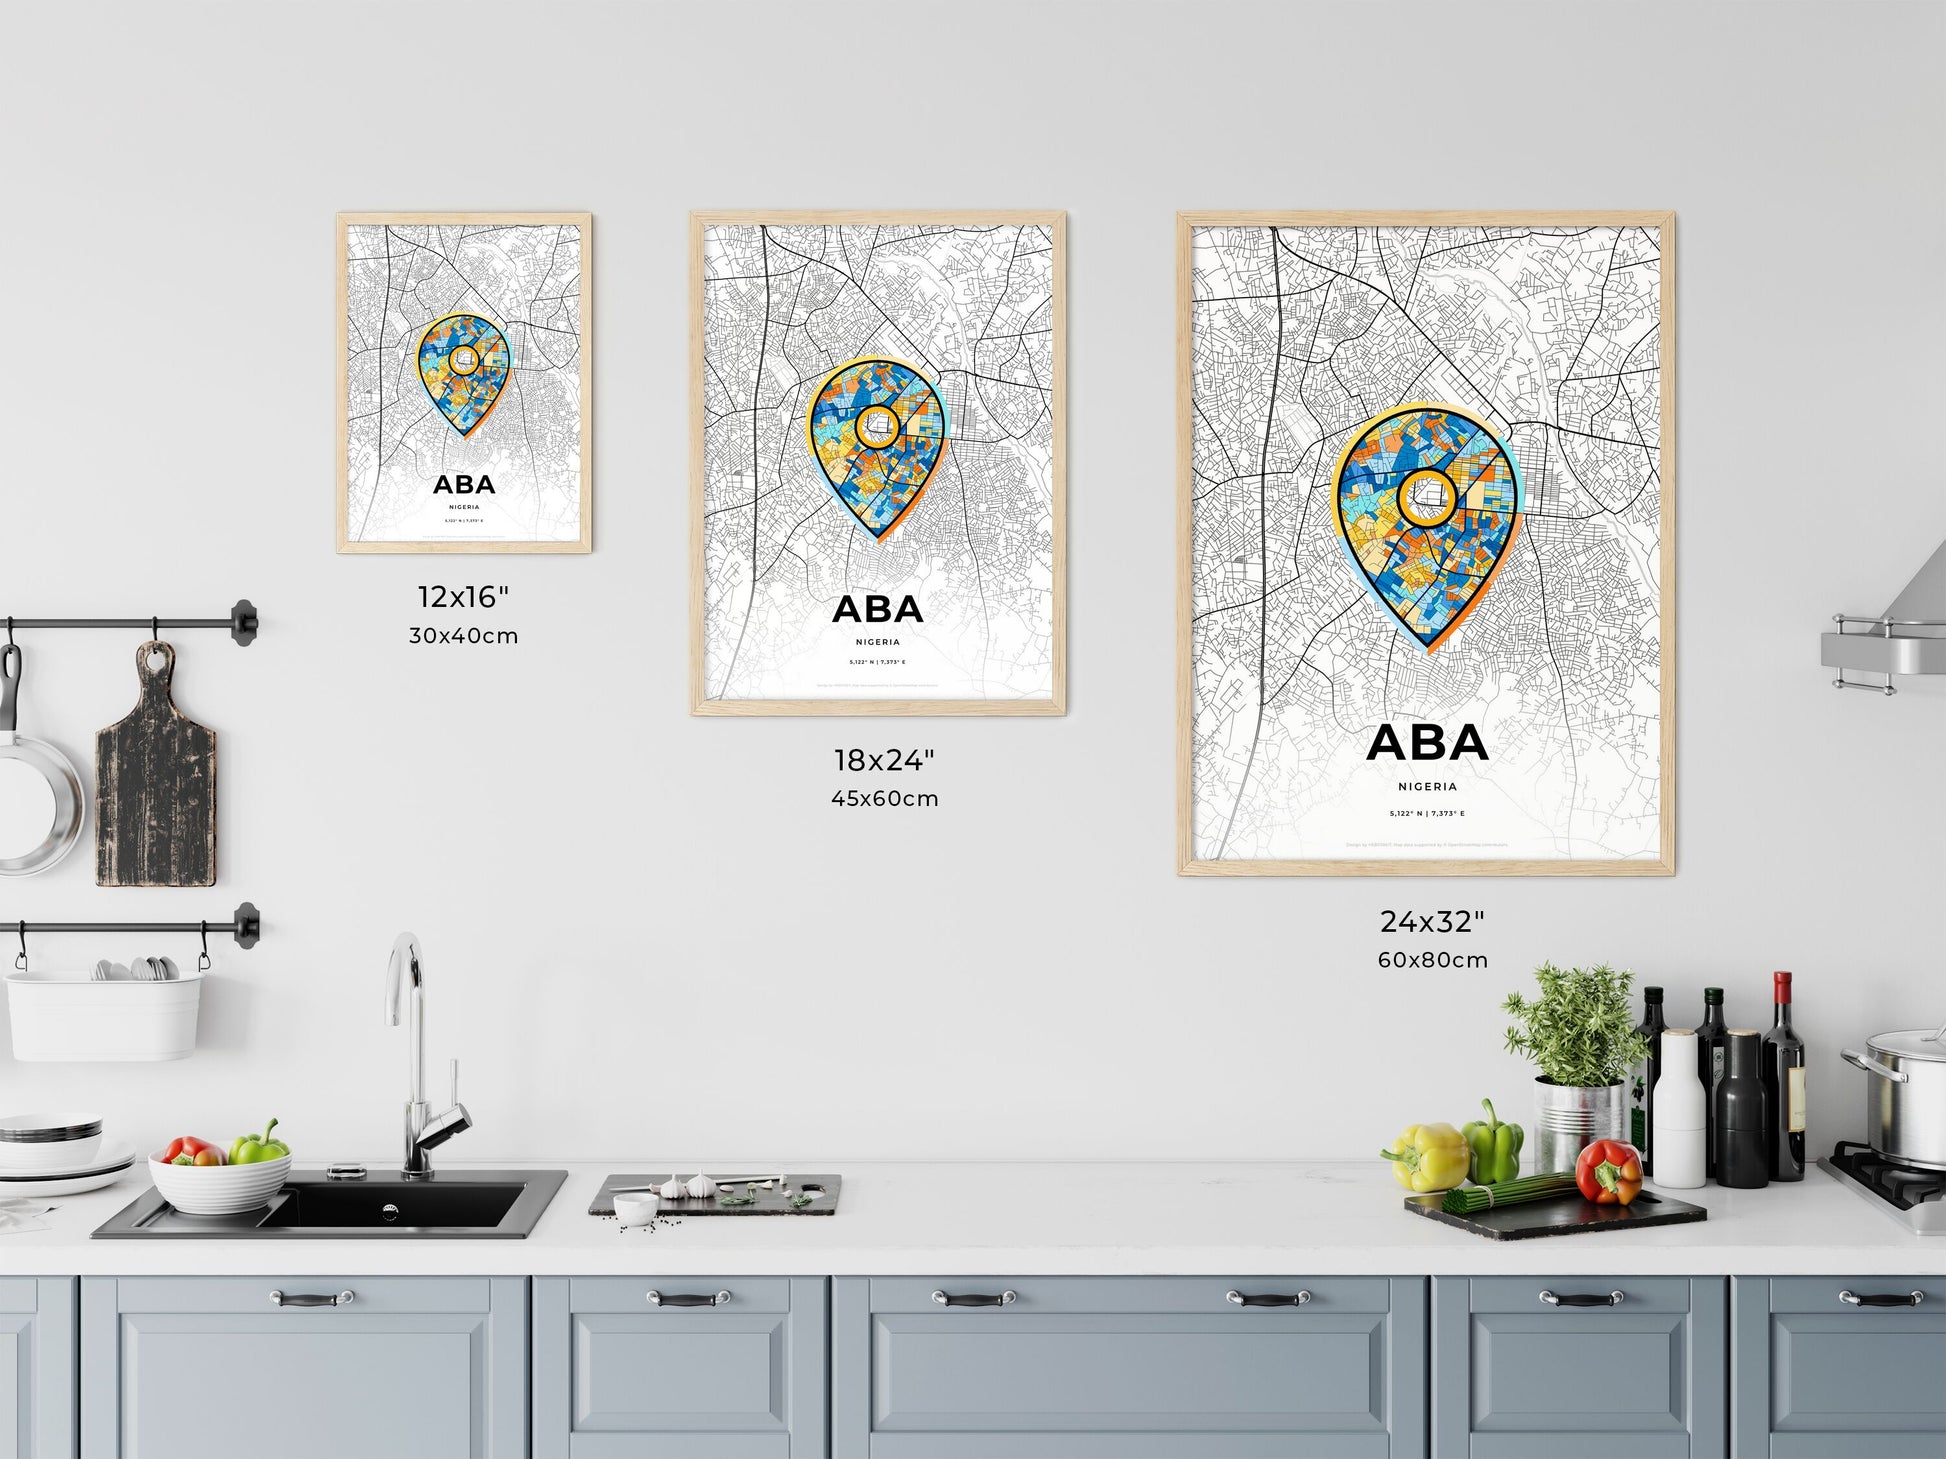 ABA NIGERIA minimal art map with a colorful icon. Where it all began, Couple map gift.